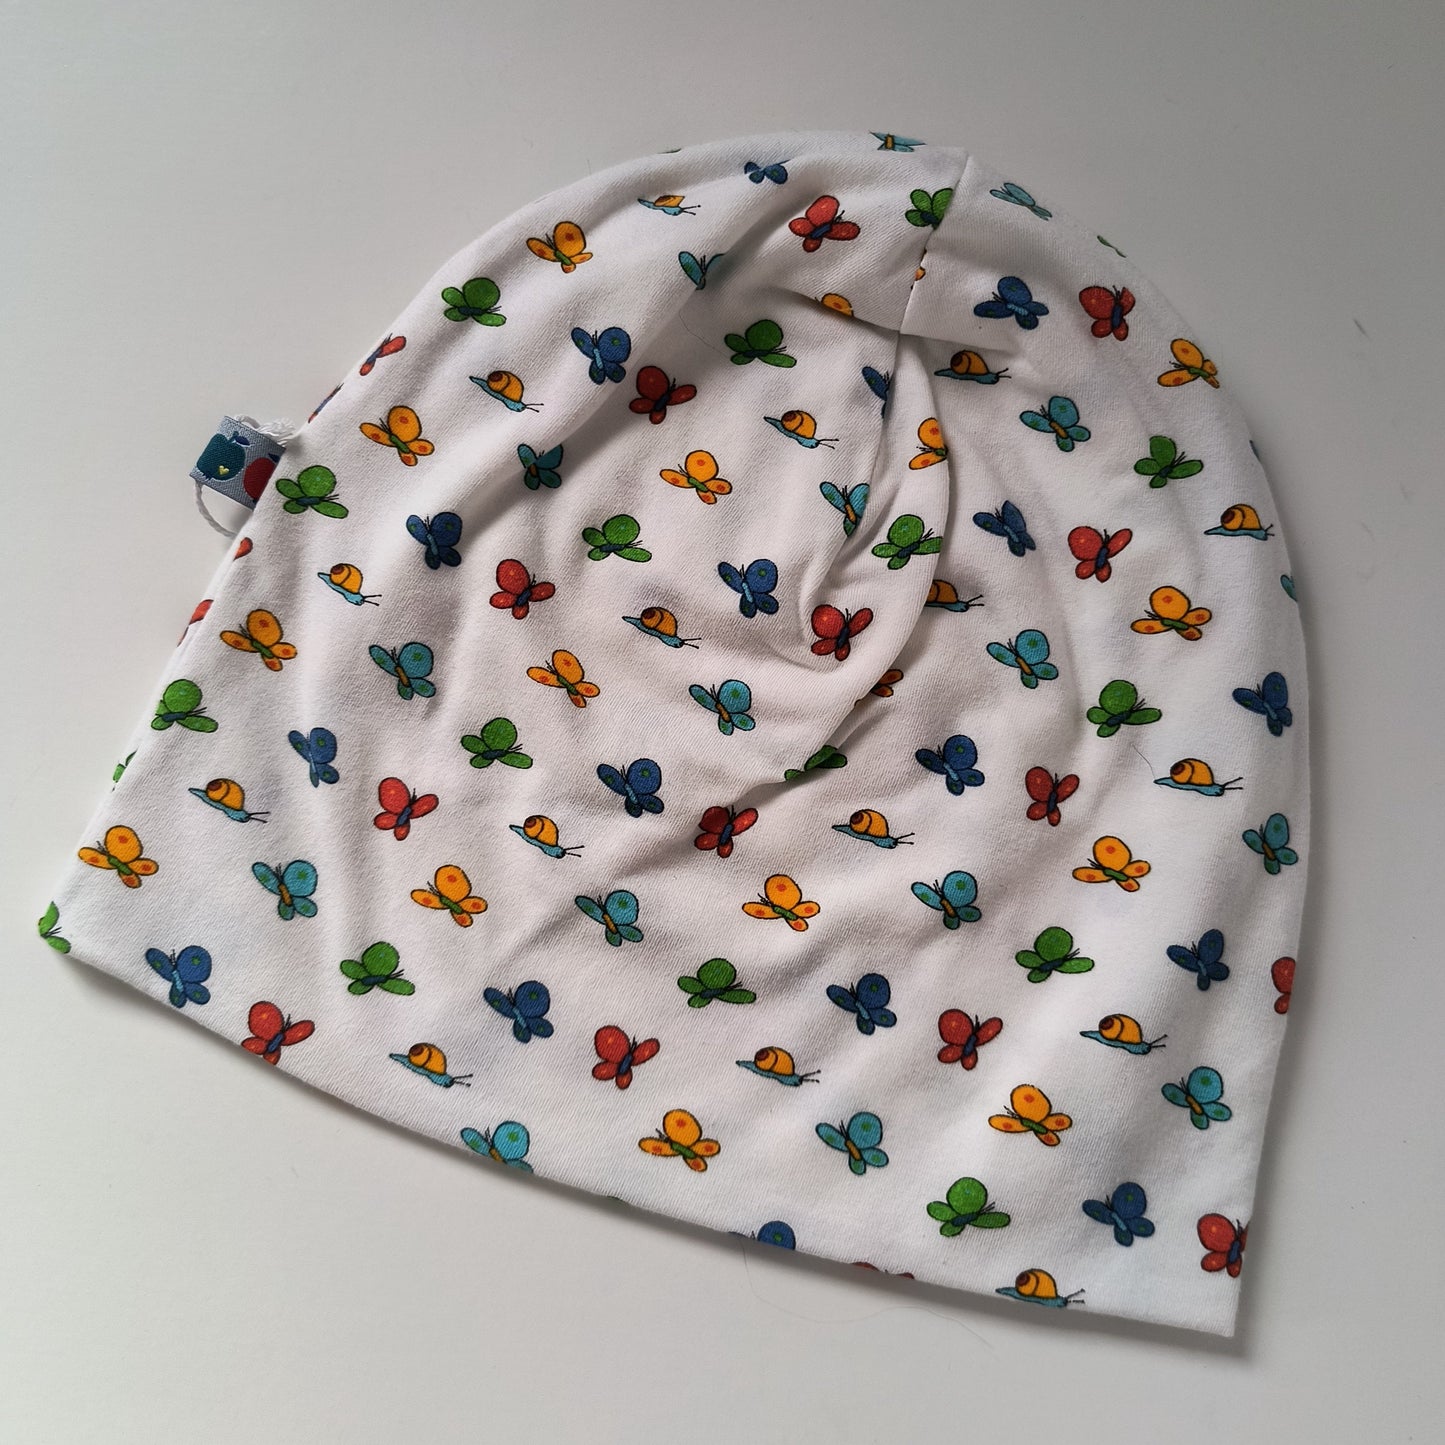 Toddler beanie hat, retro butterflies, size EUR 52 cm head circumference/US 2-5 years (Handmade in Canada)